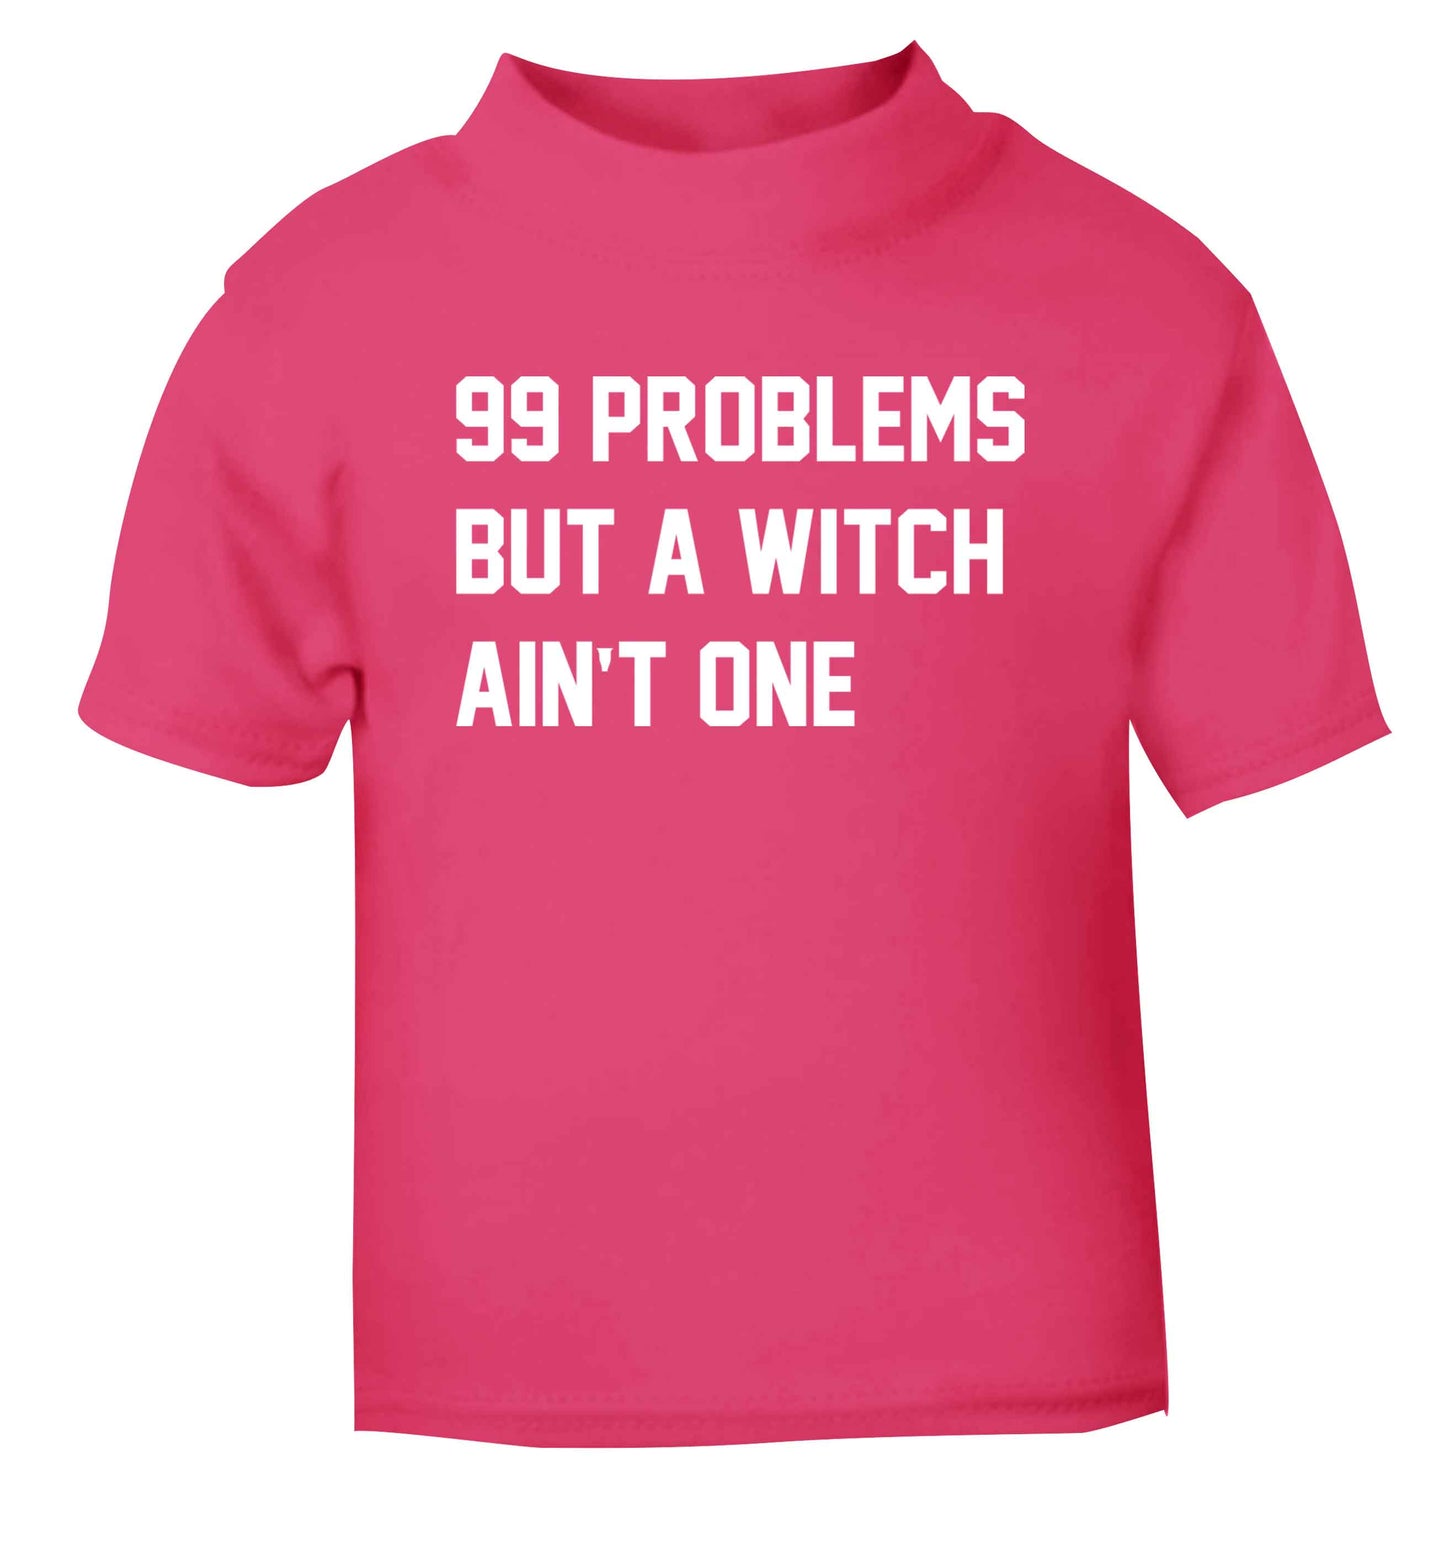 99 Problems but a witch aint one pink baby toddler Tshirt 2 Years